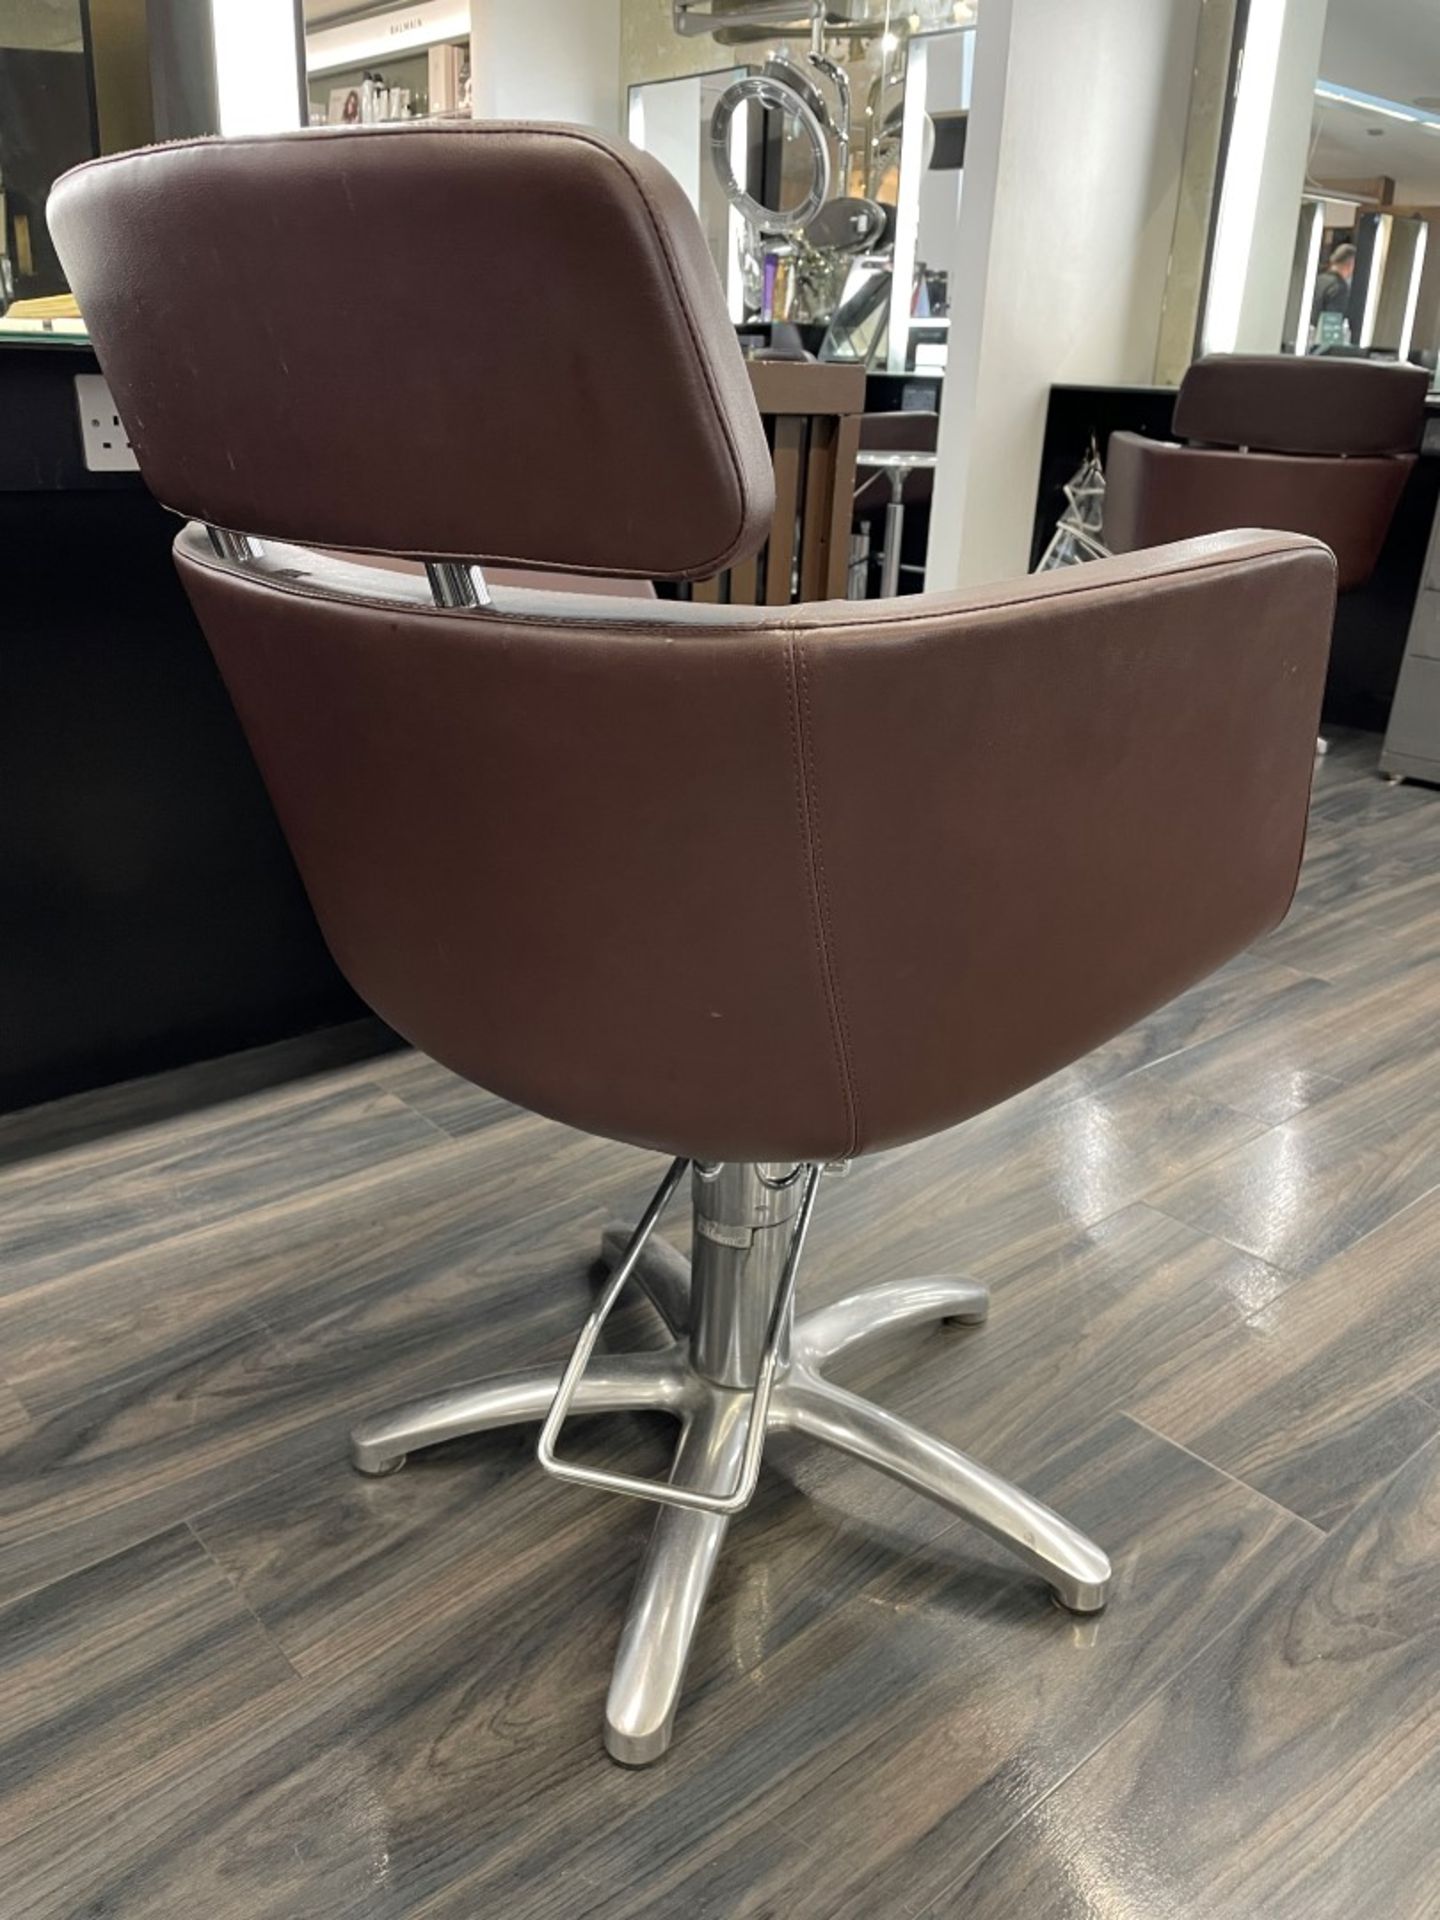 5 x Malet Branded Professional Hairdressing Salon Swivel Chairs In Brown - Includes 4 x Foot Rests - Image 4 of 7